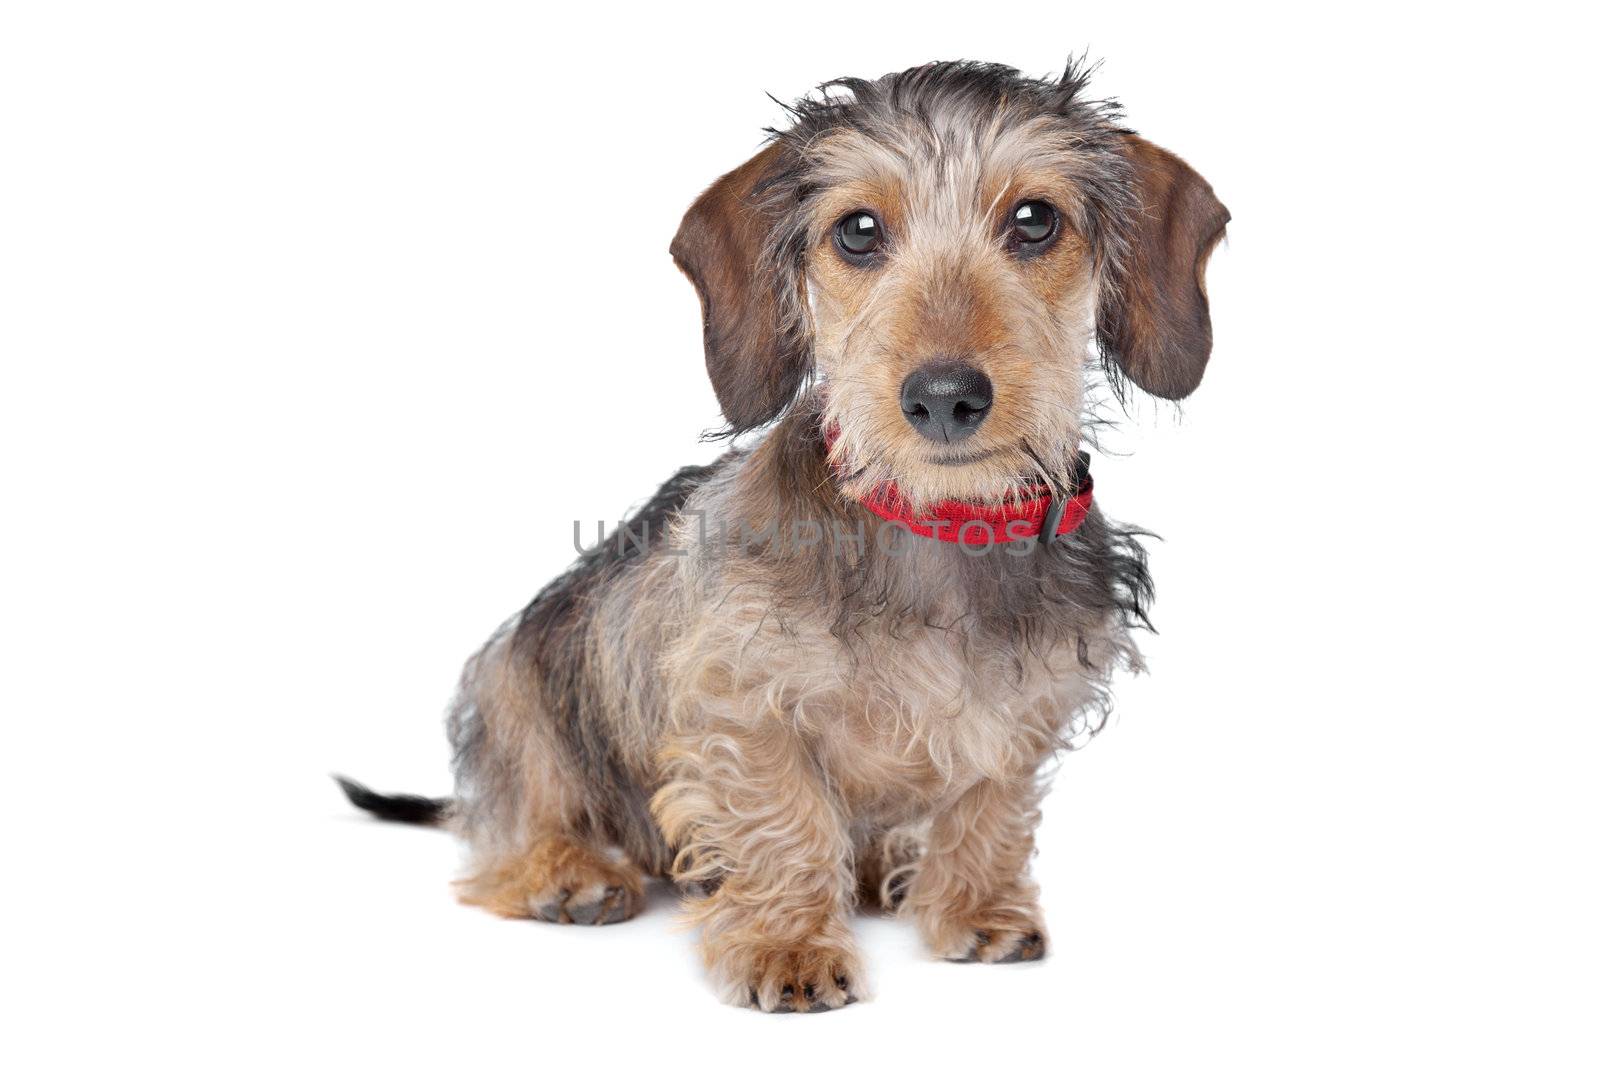 Wire-haired Dachshund in front of a white background